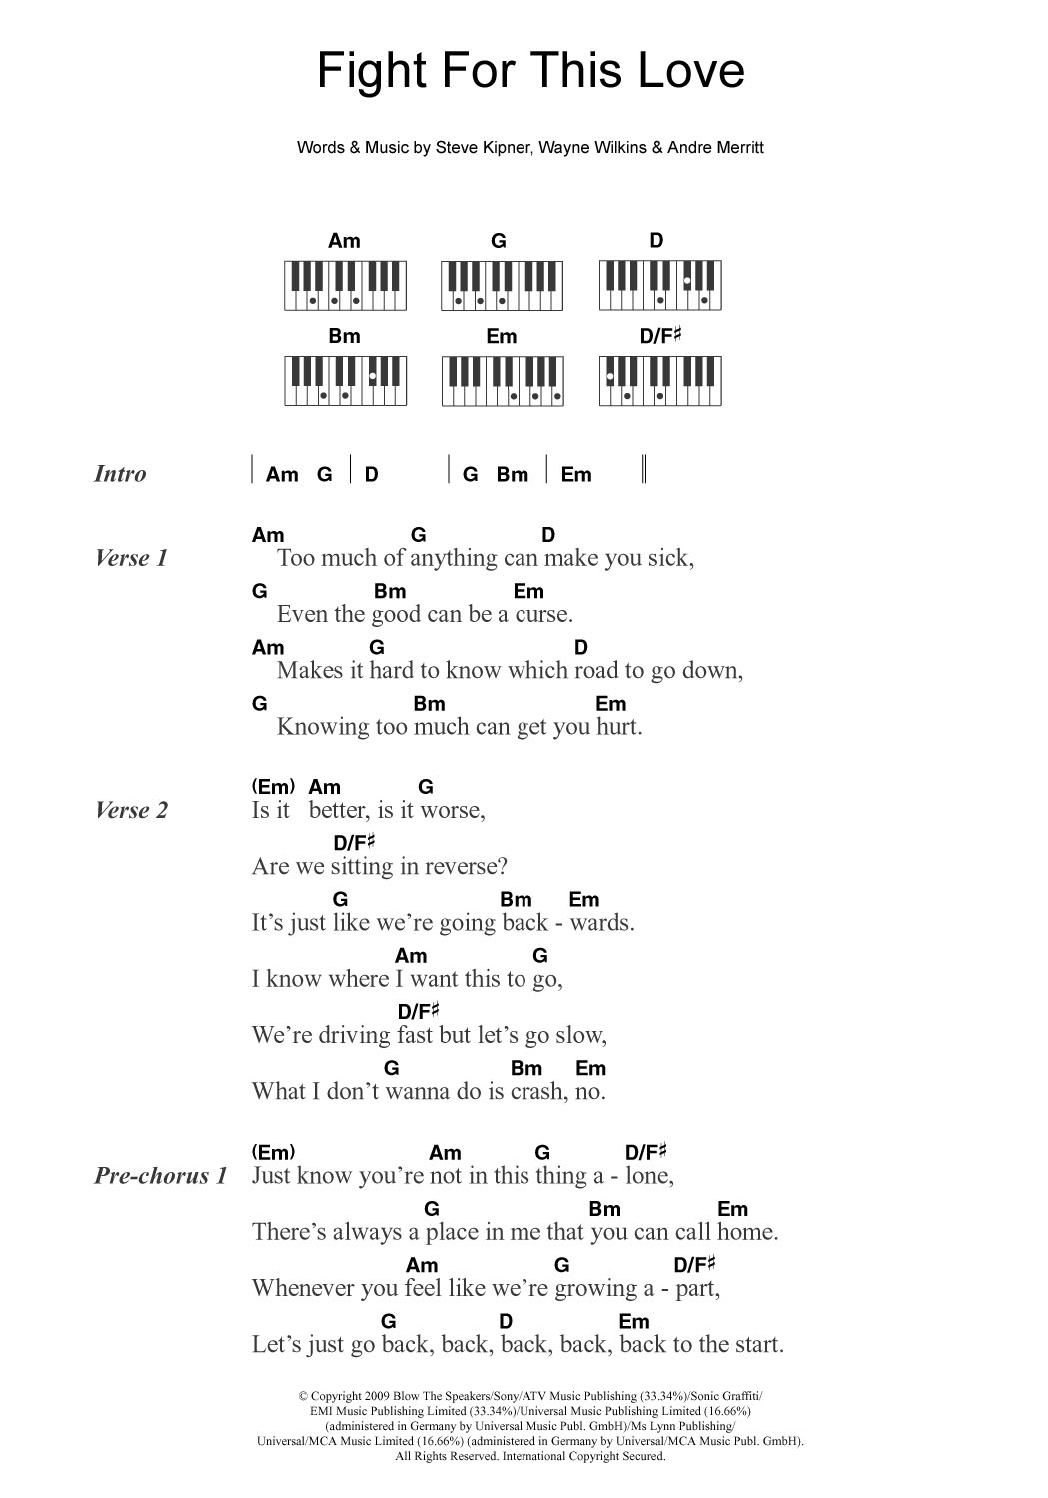 Download Cheryl Fight For This Love Sheet Music